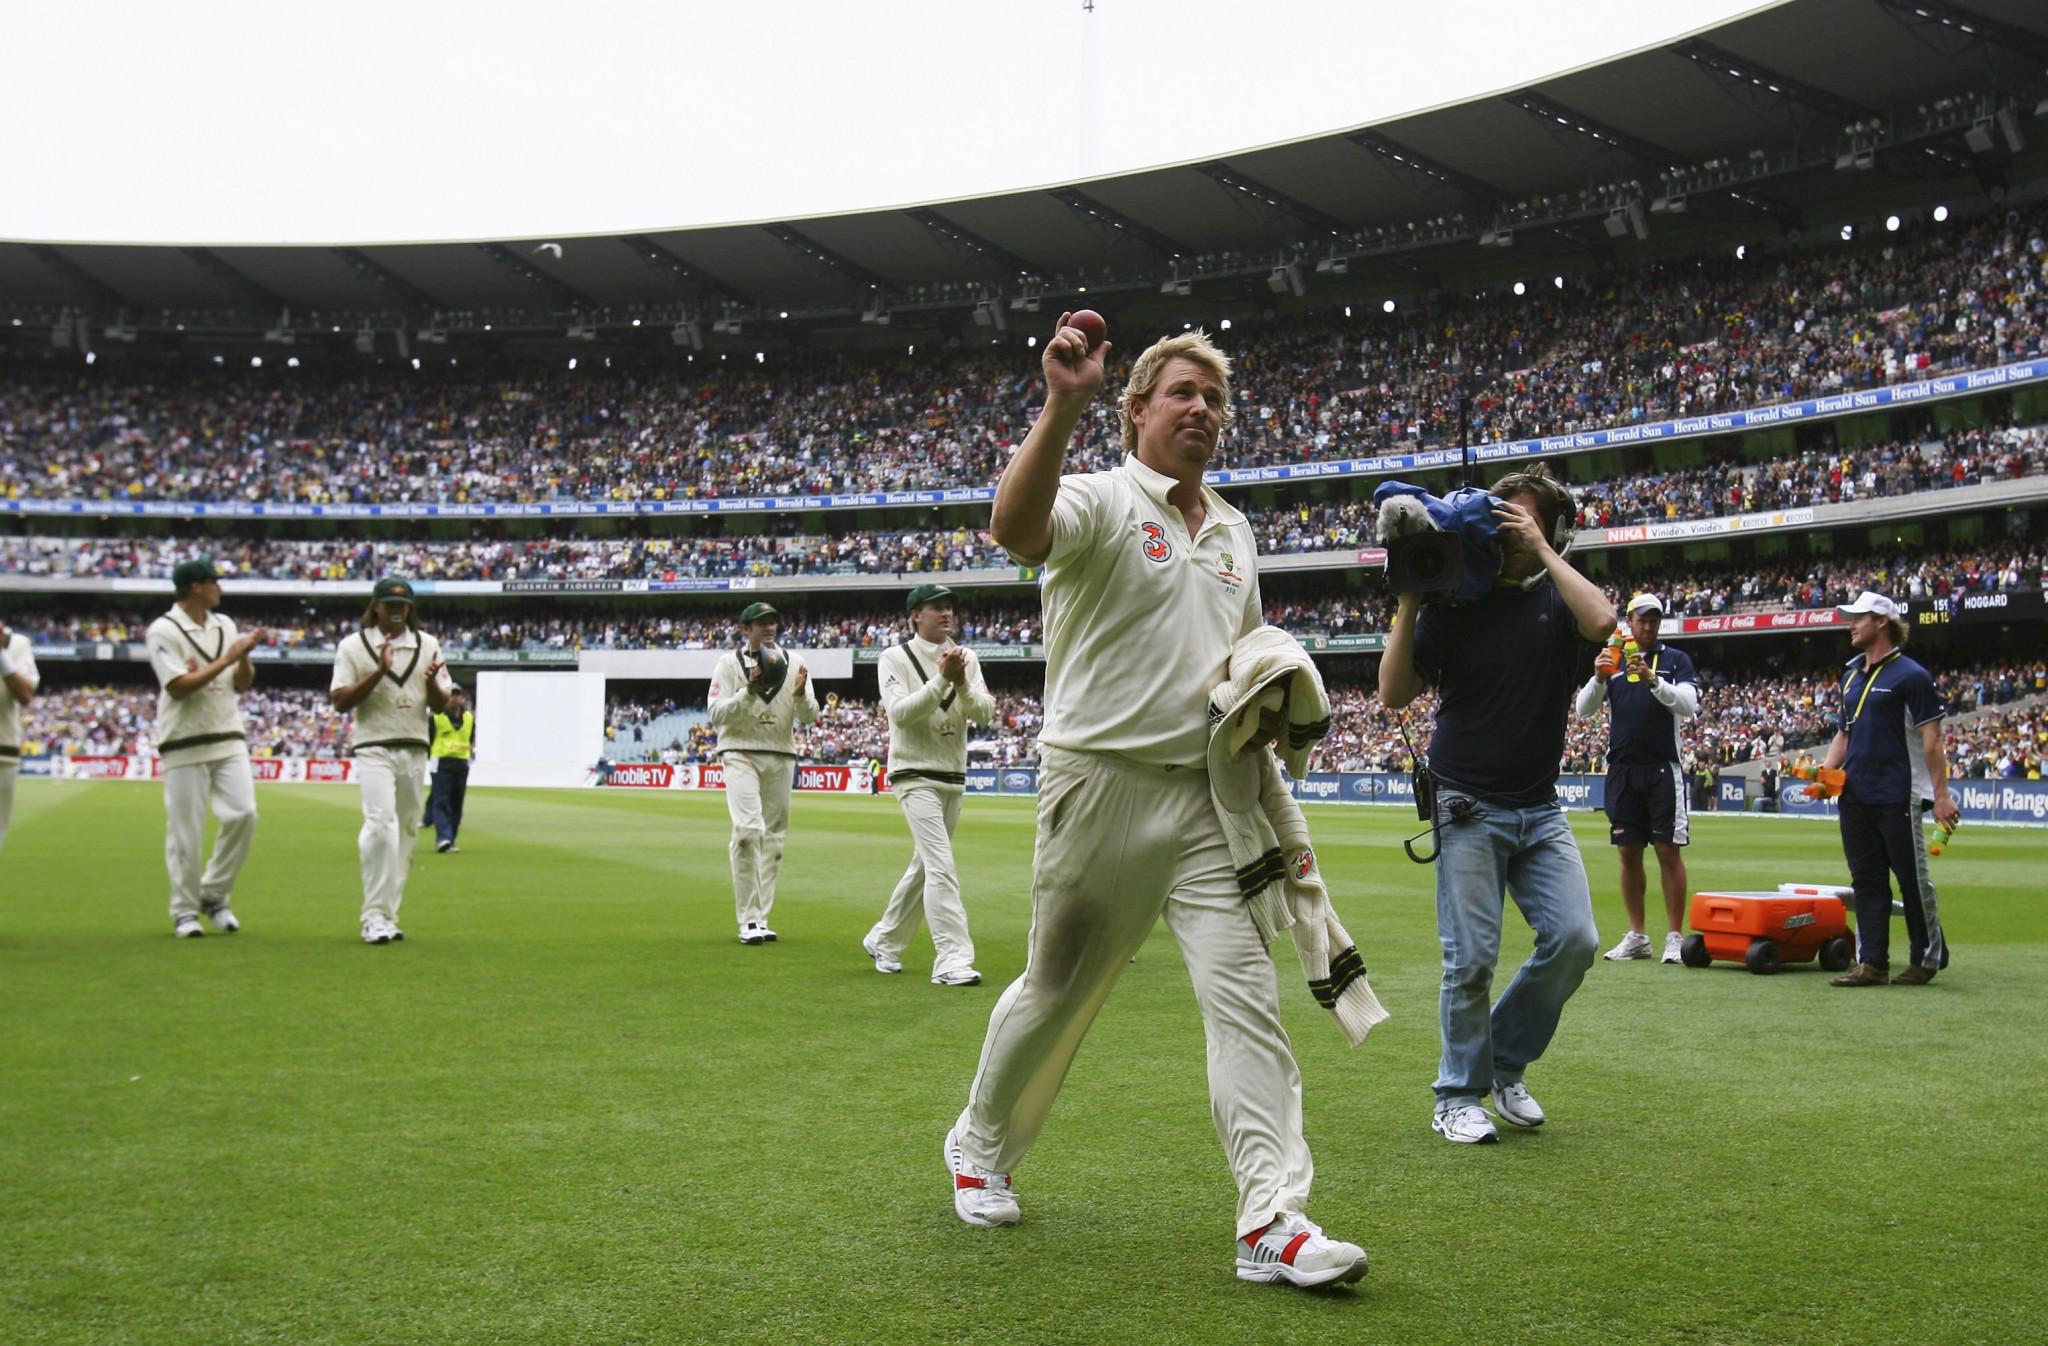 Shane Warne took 708 wickets in Test cricket and single-handedly revived the art of leg-spin bowling ©Getty Images